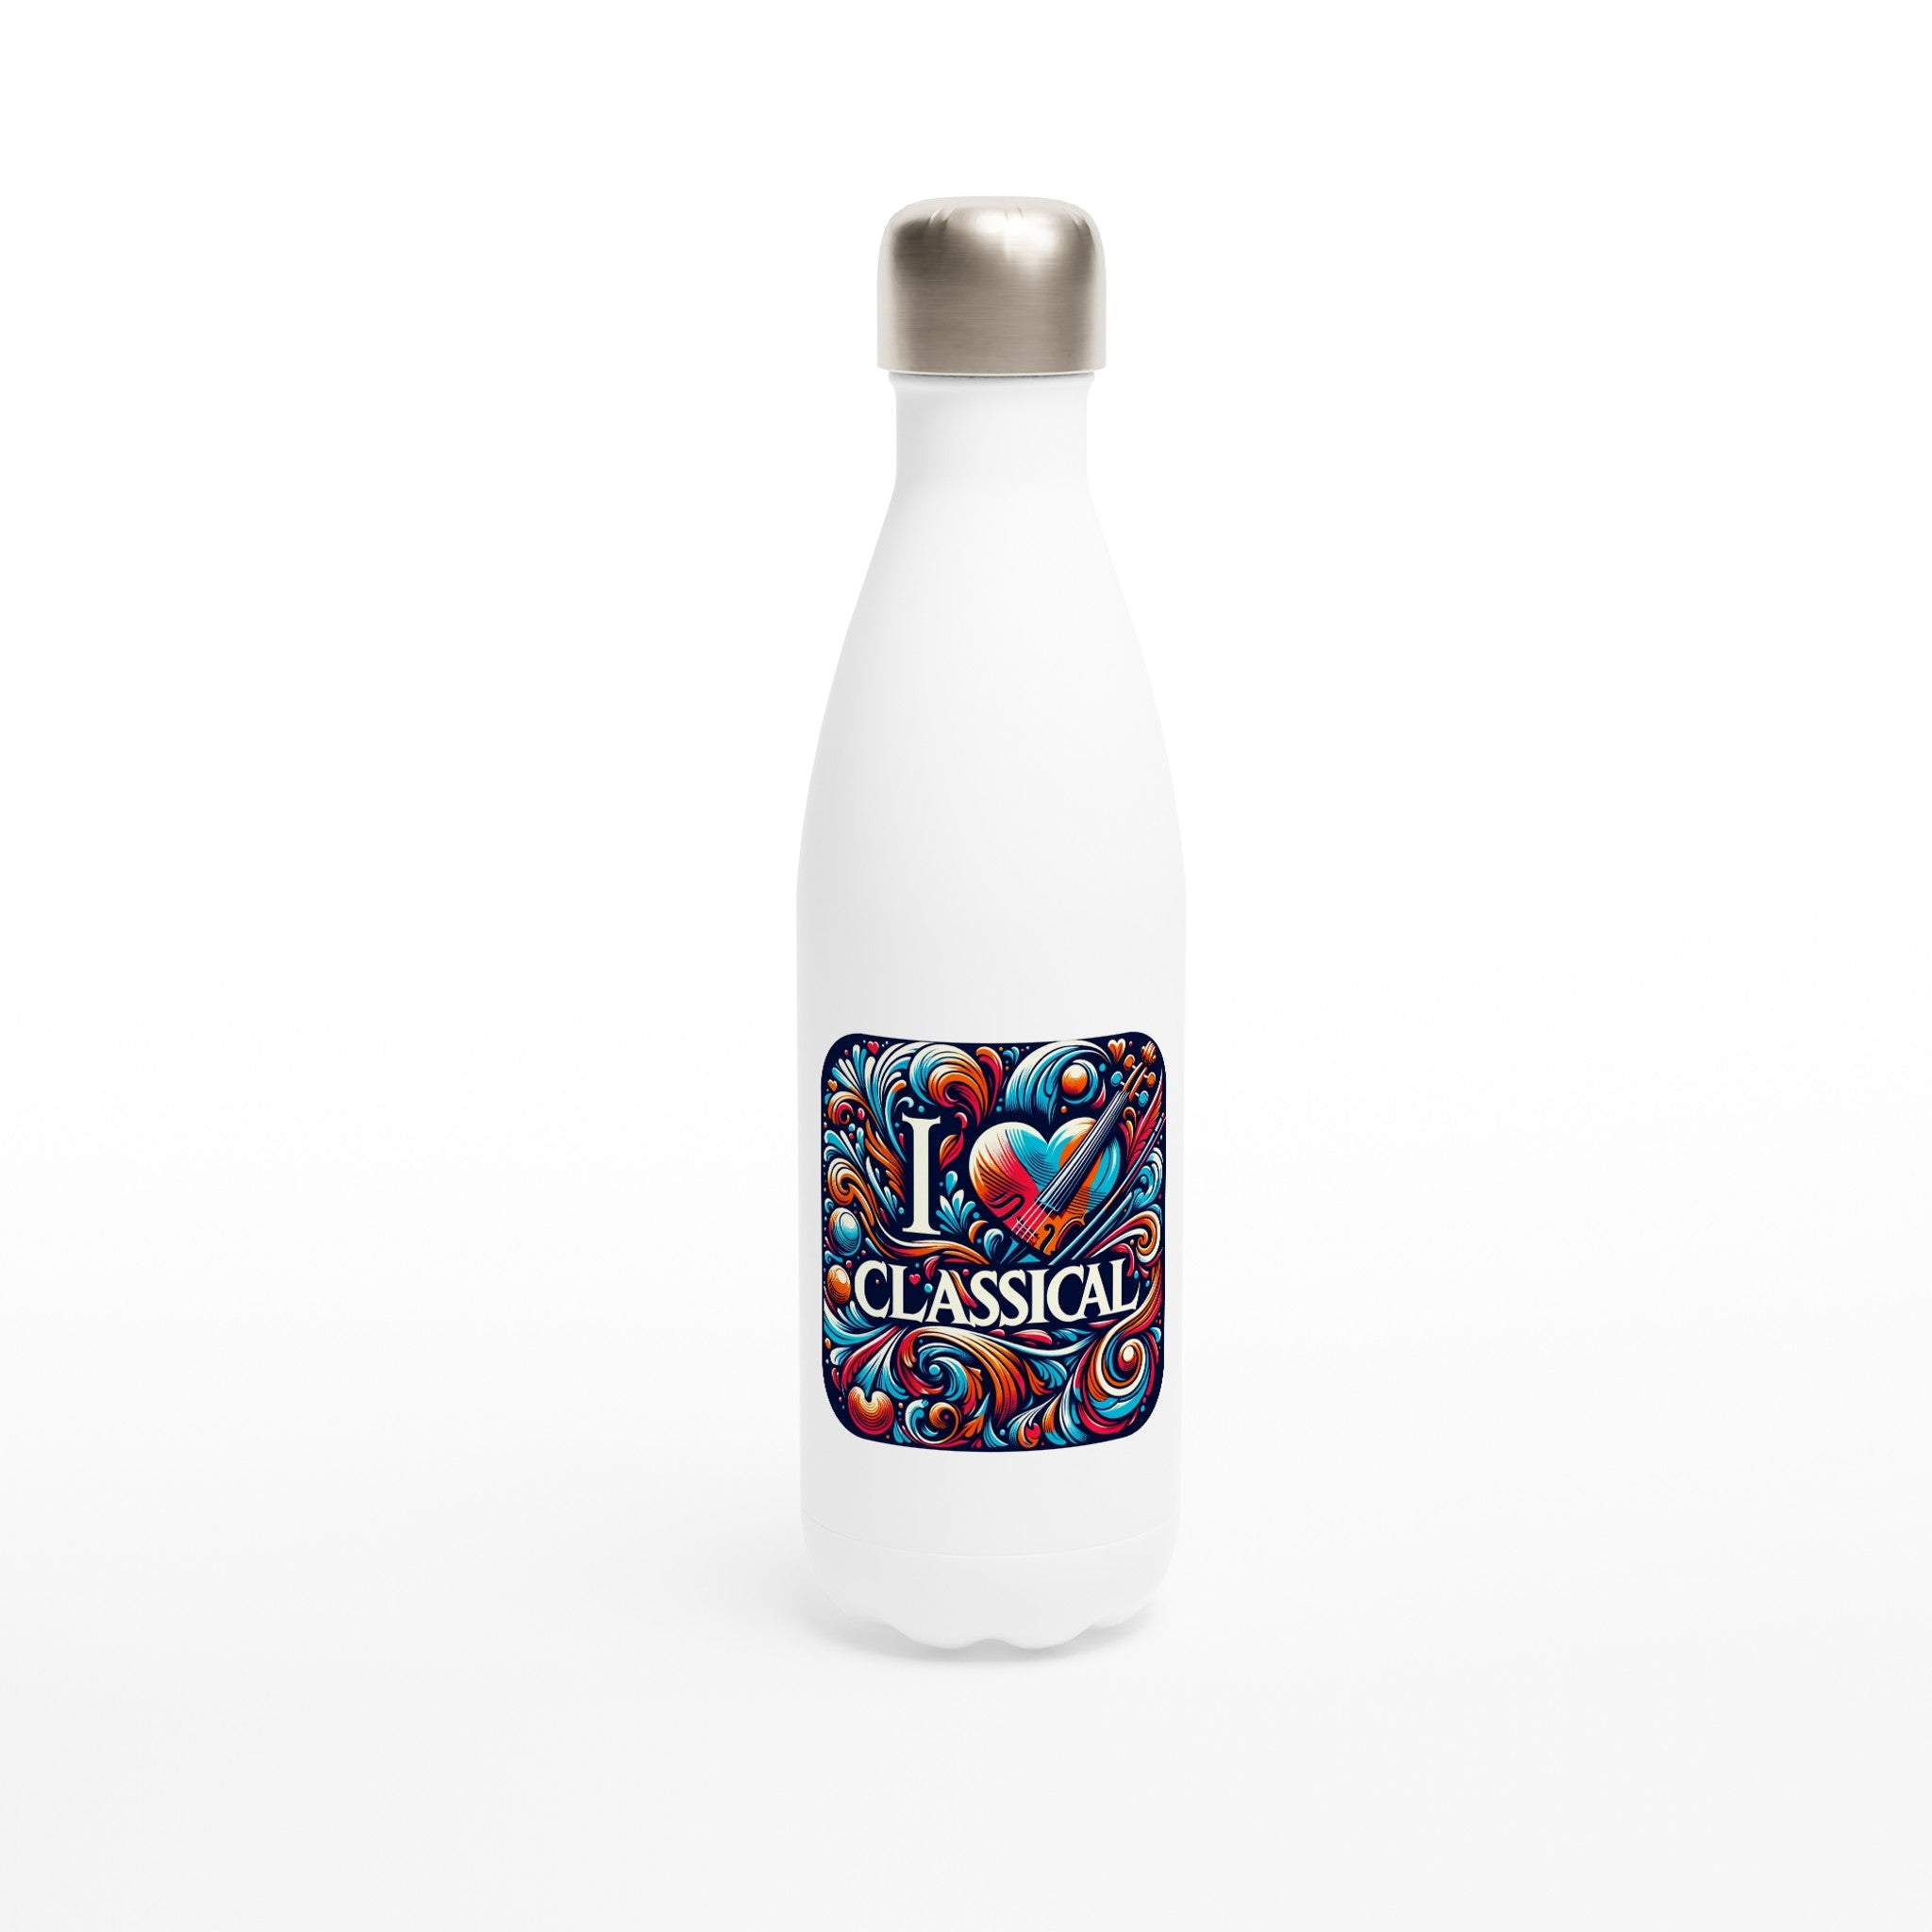 "I LOVE CLASSICAL" White 17oz Stainless Steel Water Bottle